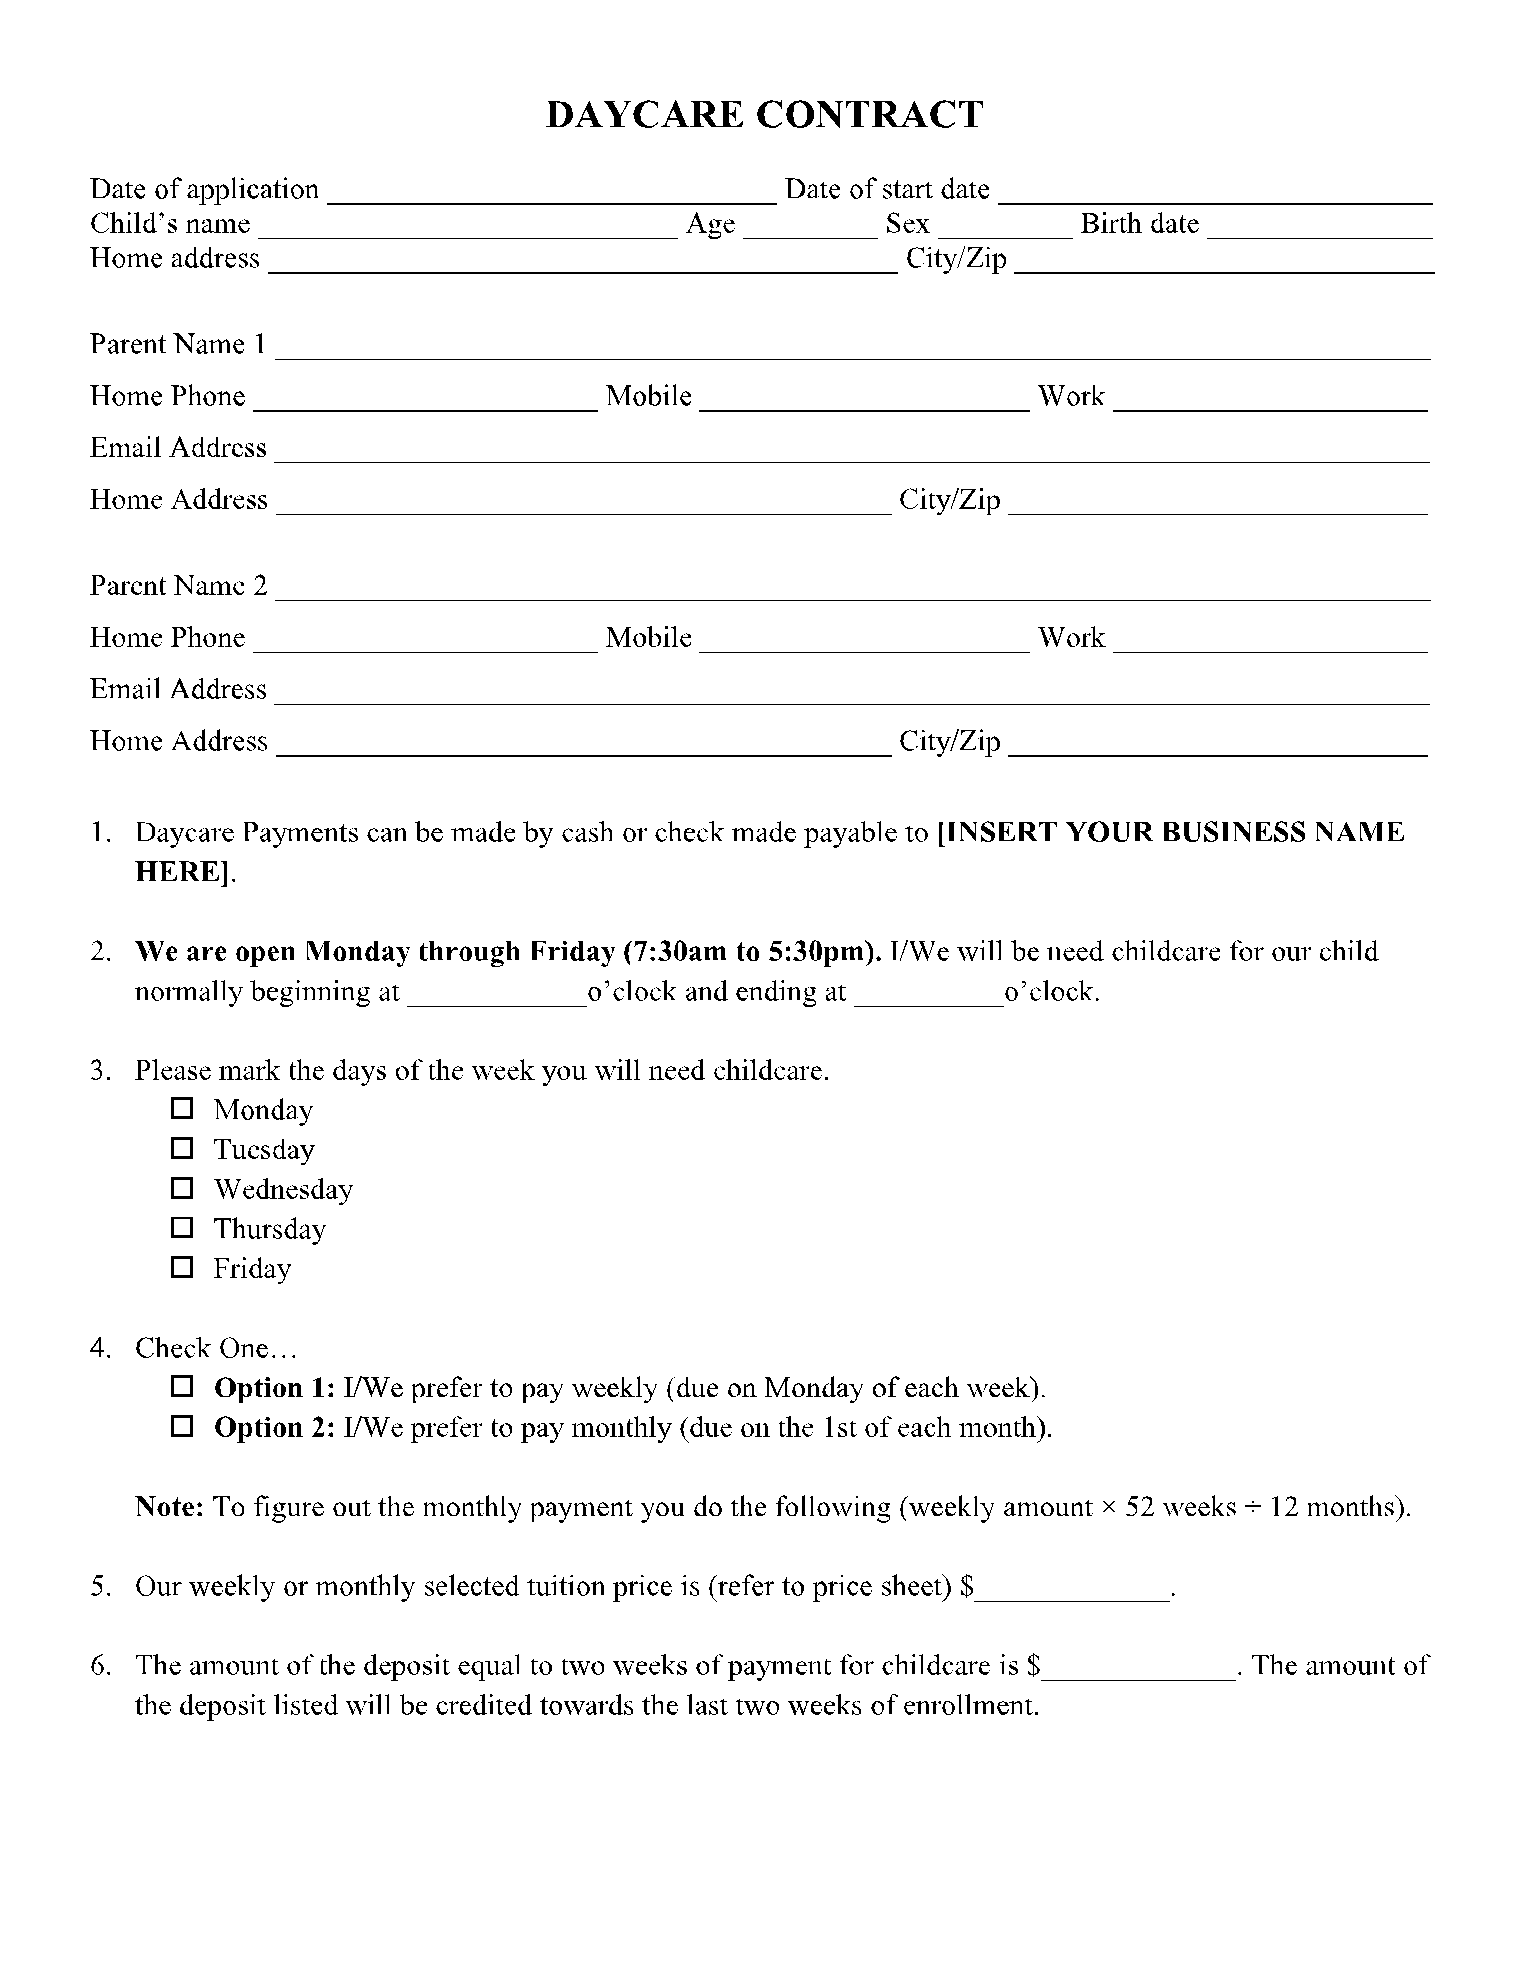 Daycare Contract Template